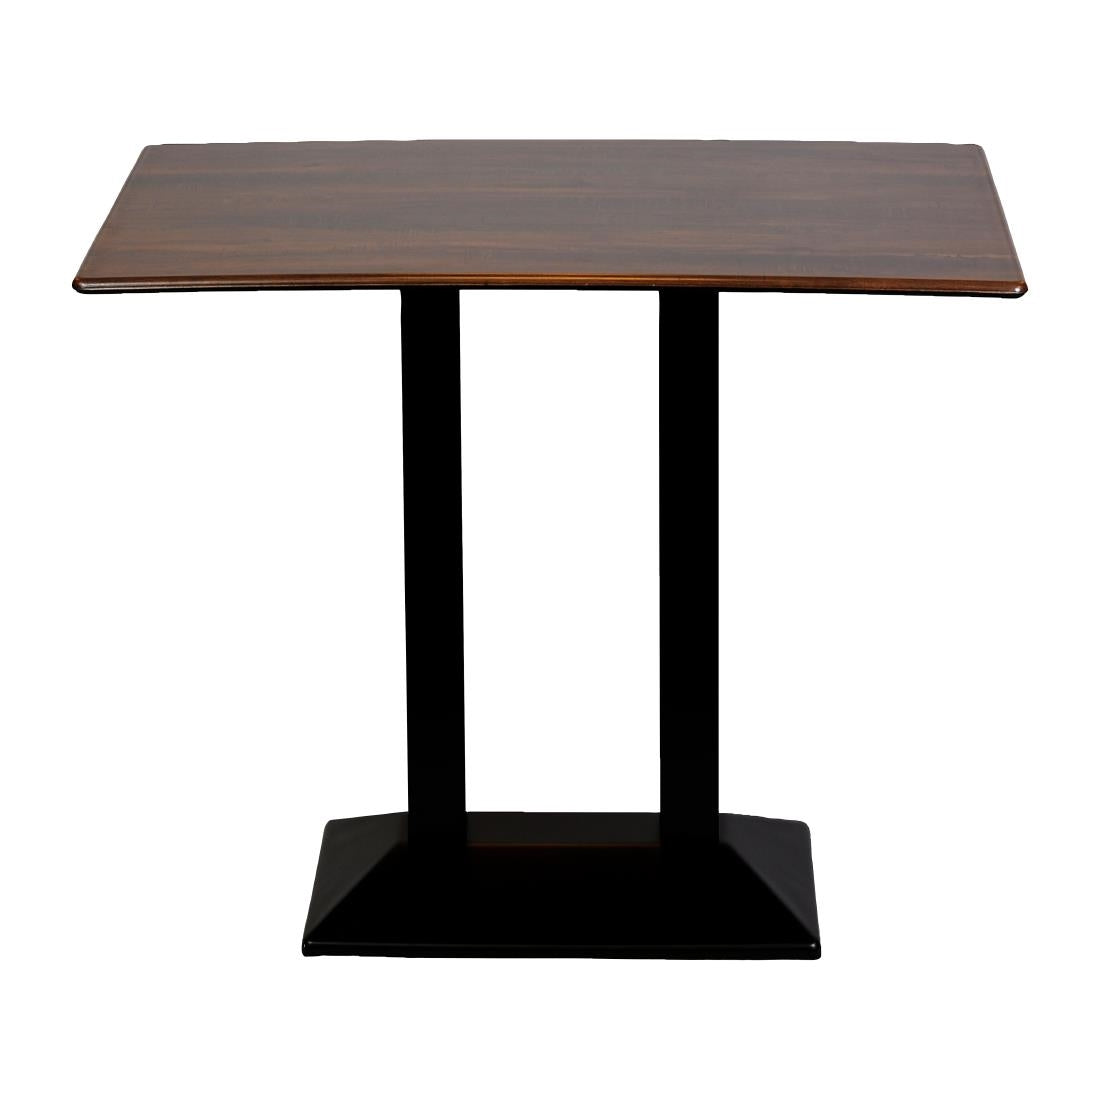 CZ841 Turin Metal Base Rectangular Poseur Table with Laminate Top Walnut 1200x700mm JD Catering Equipment Solutions Ltd